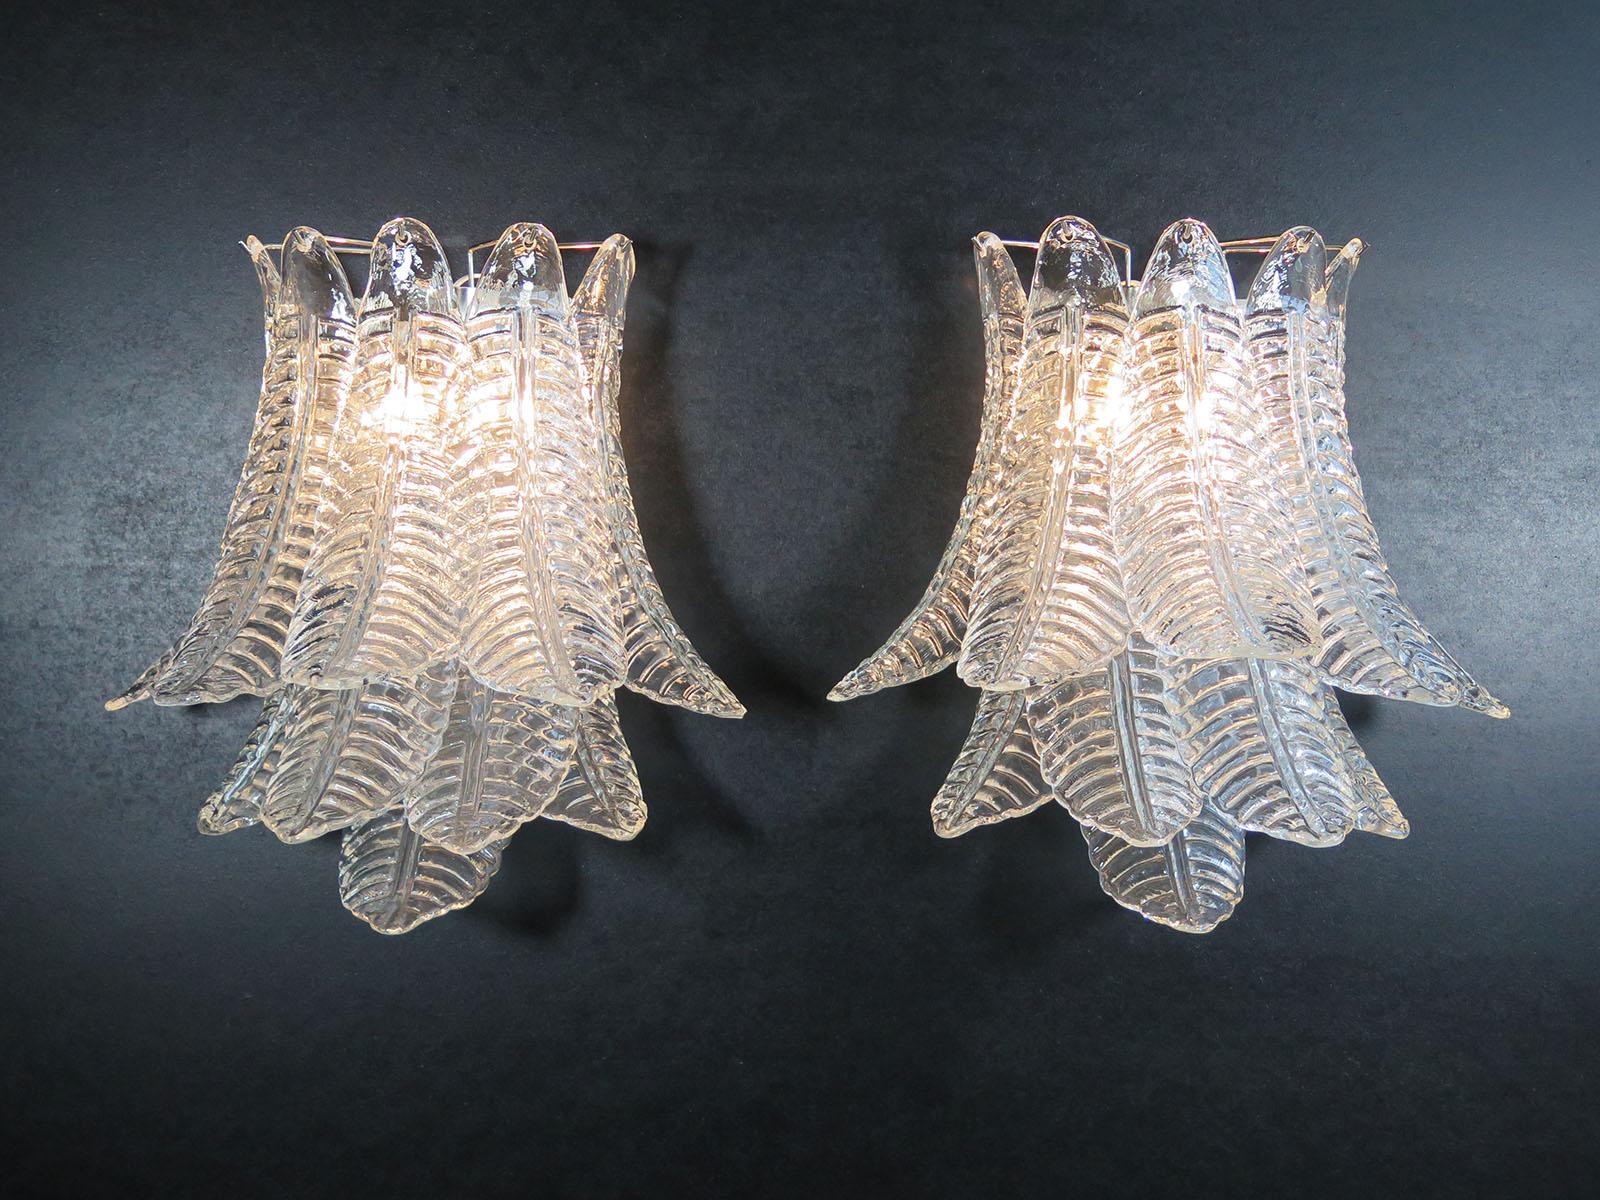 Fantastic pair of vintage Murano wall sconces made by 10 Murano trasparent Six-Tier Felci for each applique in a chrome metal frame.
Period: late XX century
Dimensions: 18,50 inches height (47 cm); 18,50 inches width (47 cm); 13 inches depth from